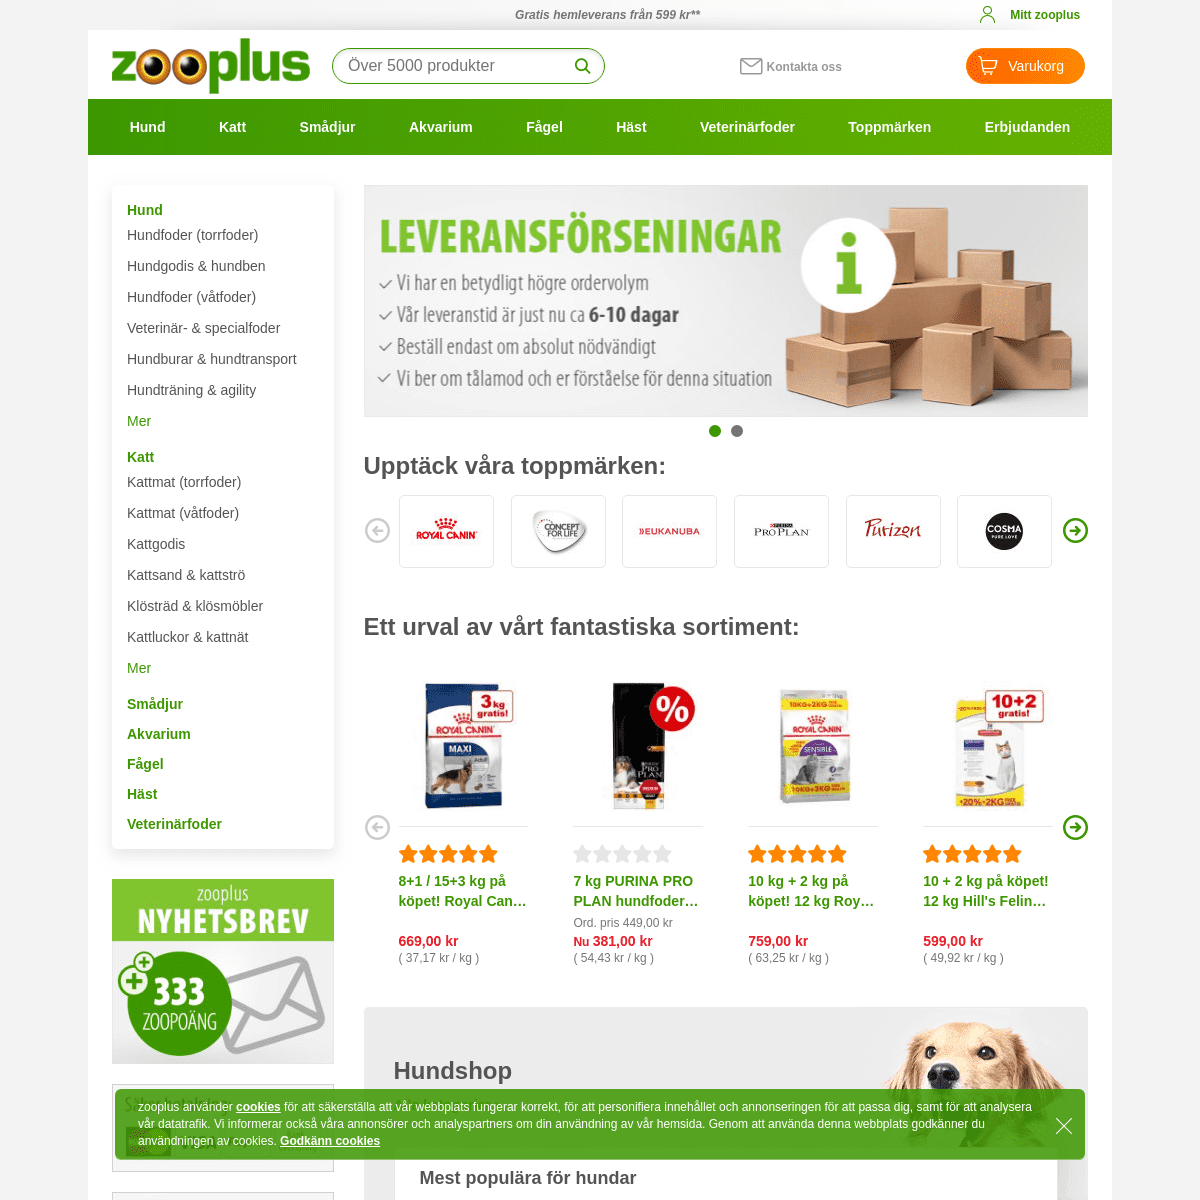 A complete backup of zooplus.se